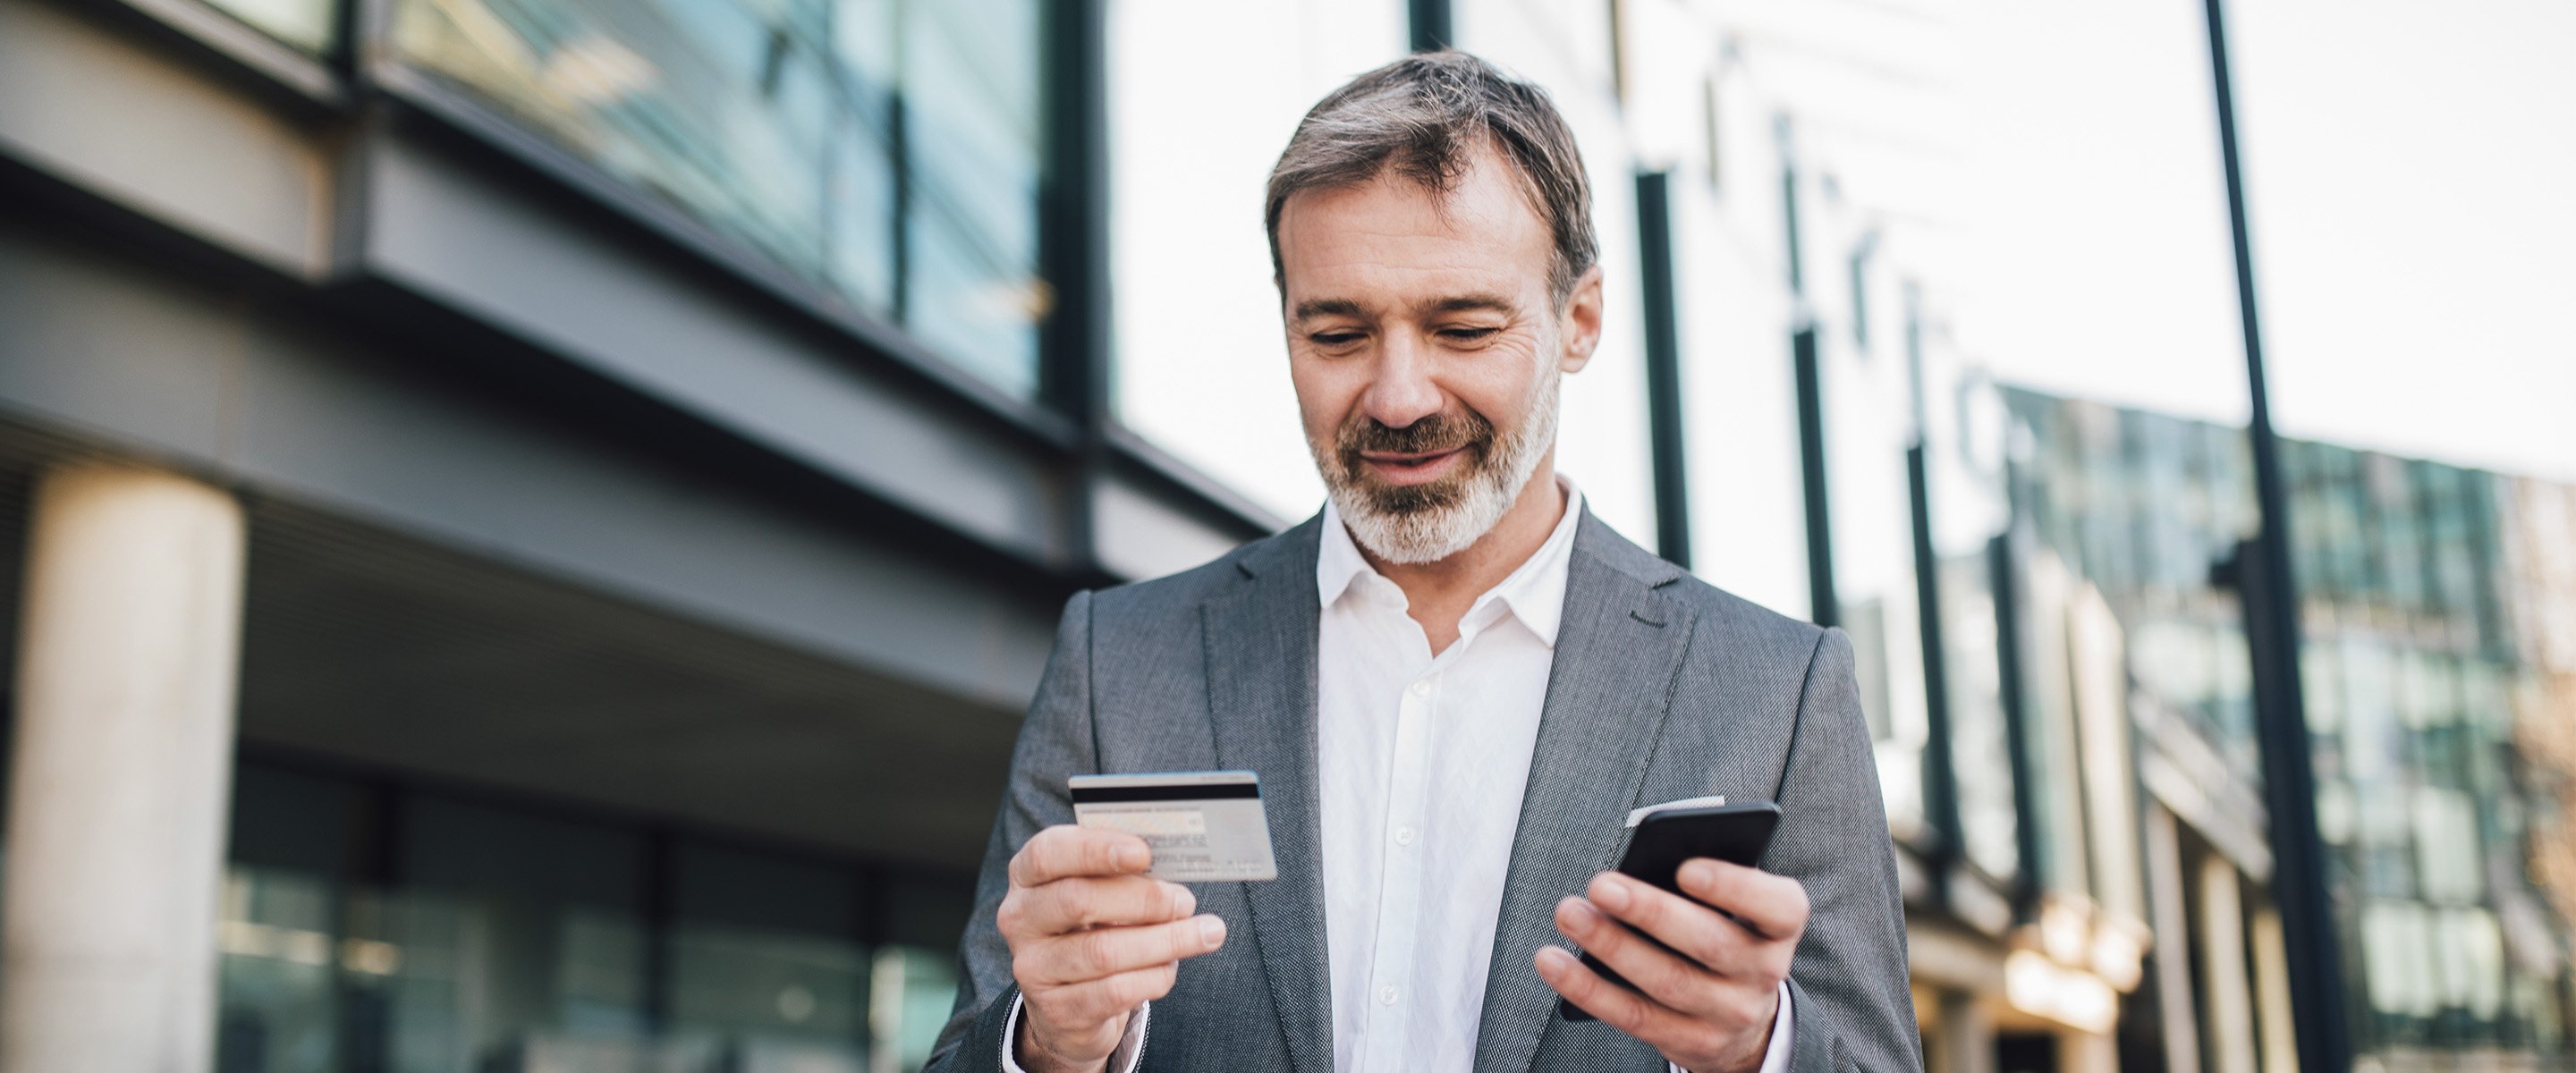 man outside office building using mobile phone and credit card